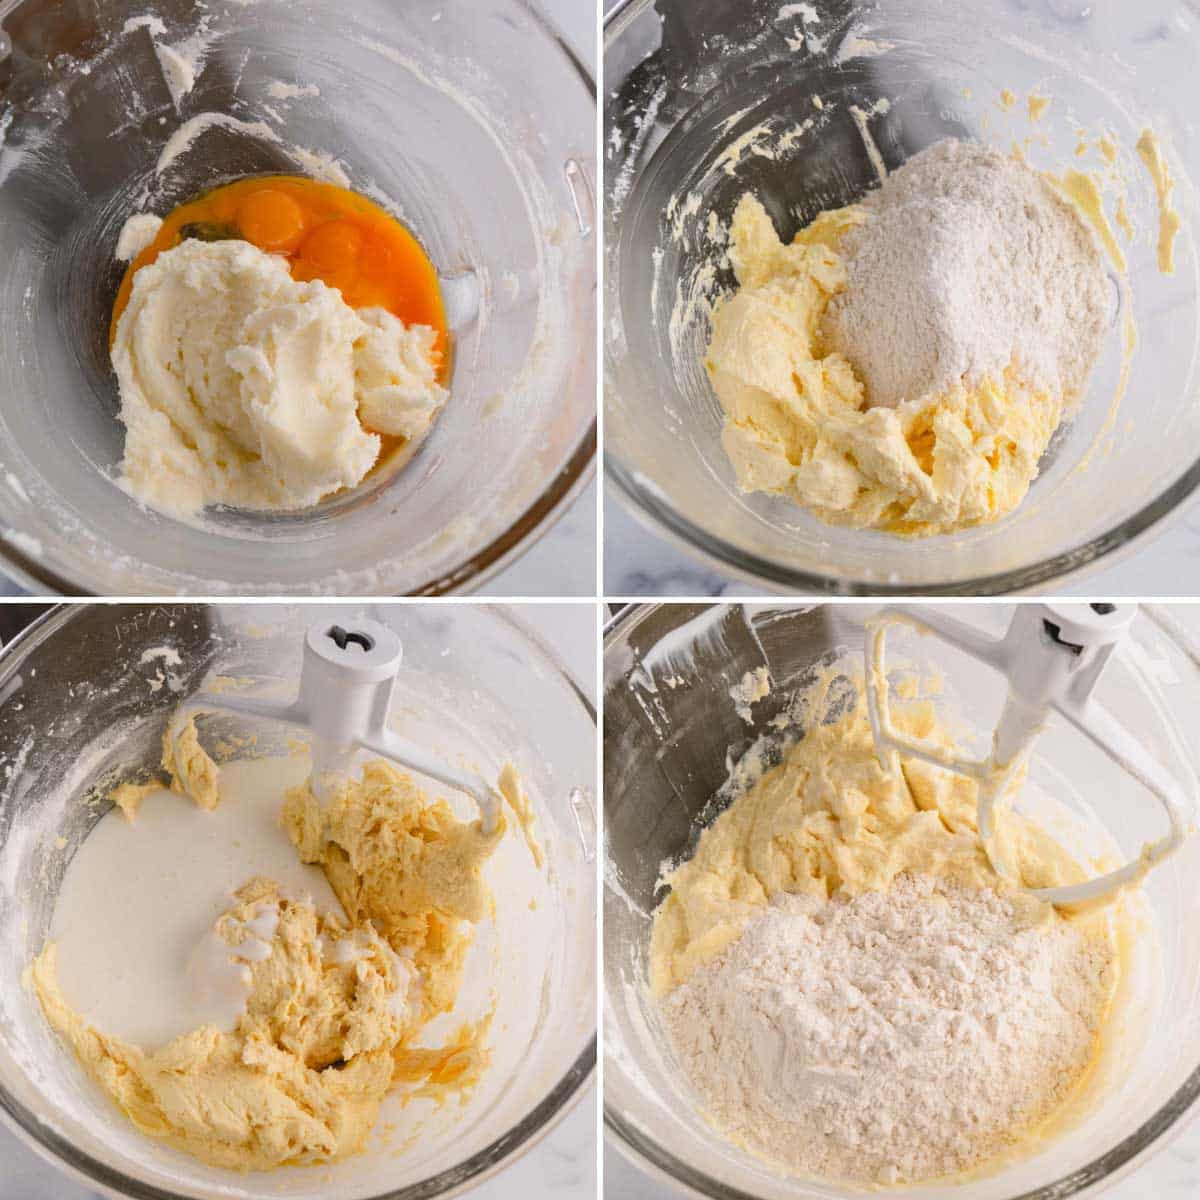 Four images showing the process of blending yellow cake batter in a stand mixer.